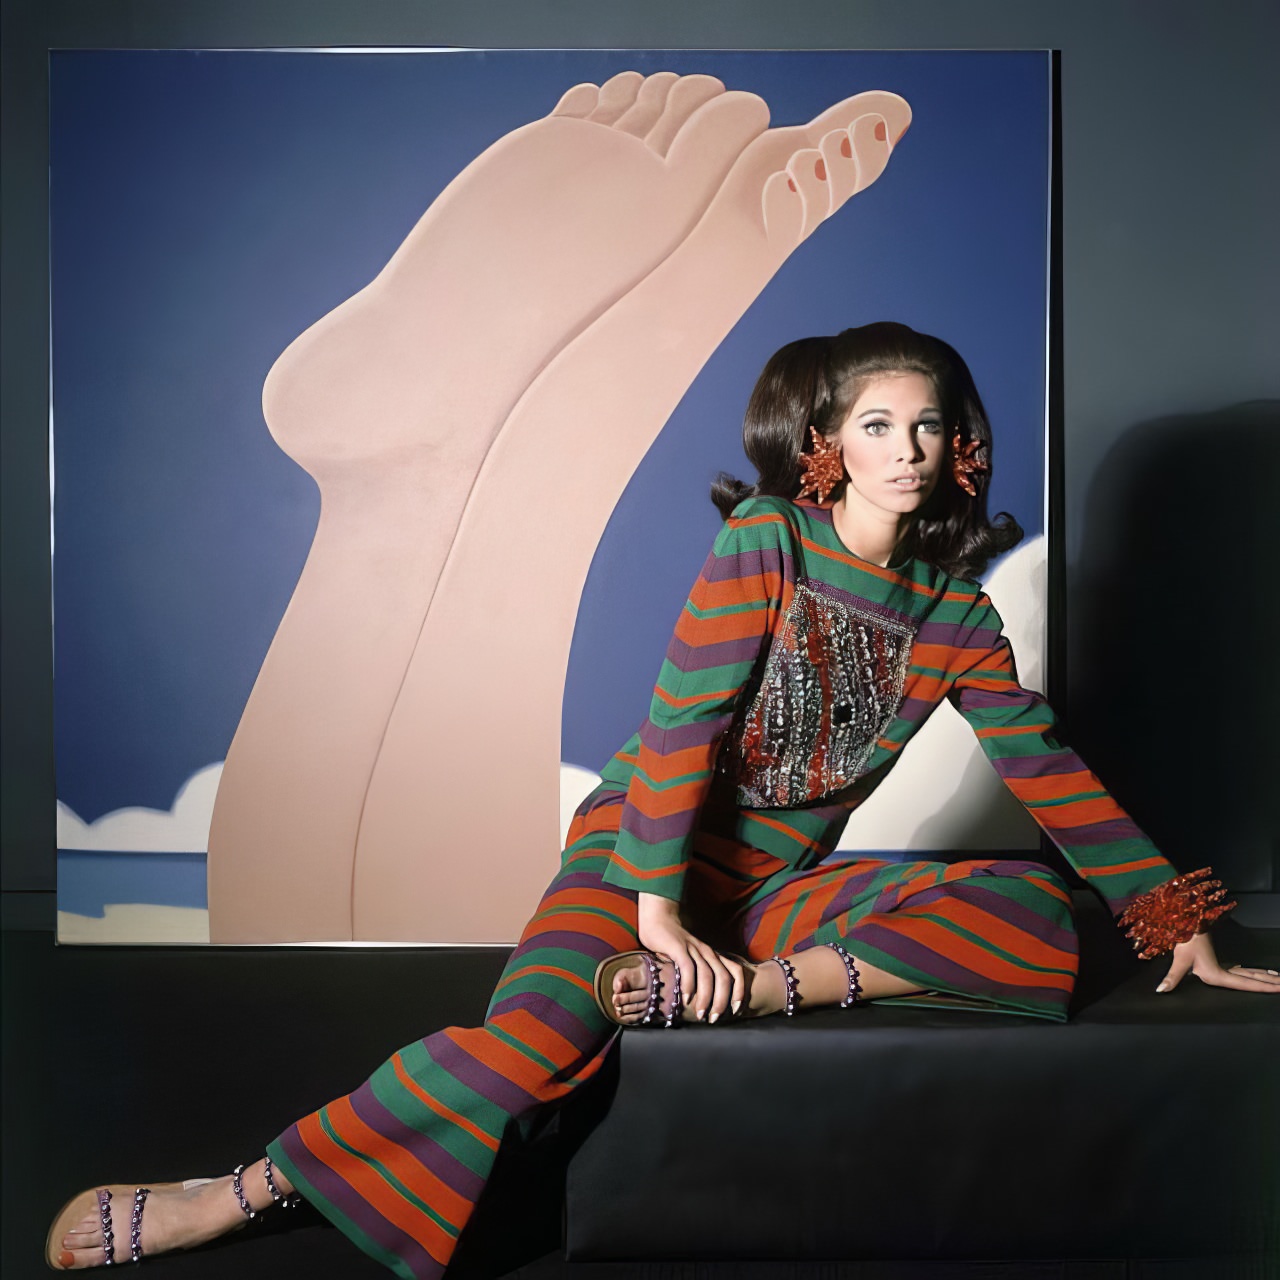 Ann Turkel wore Roman-striped evening pajamas by Galanos and sandals by Dal Co, 1966.